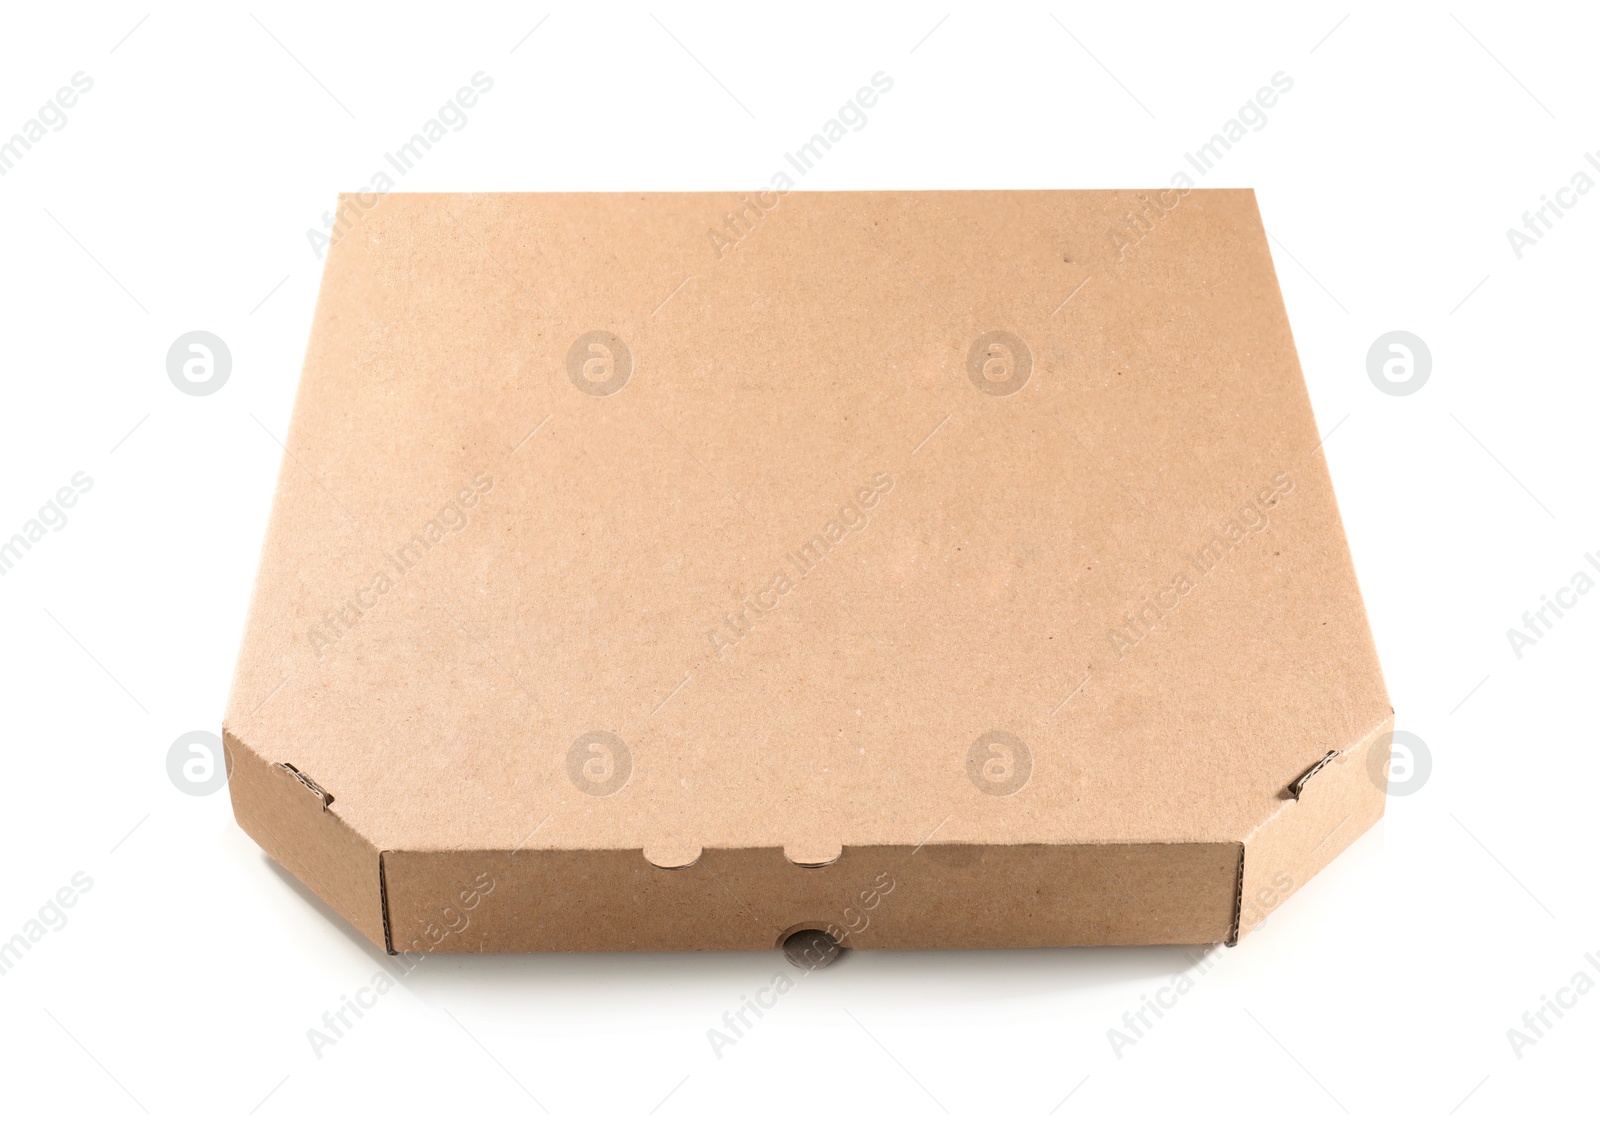 Photo of Cardboard pizza box on white background. Food delivery